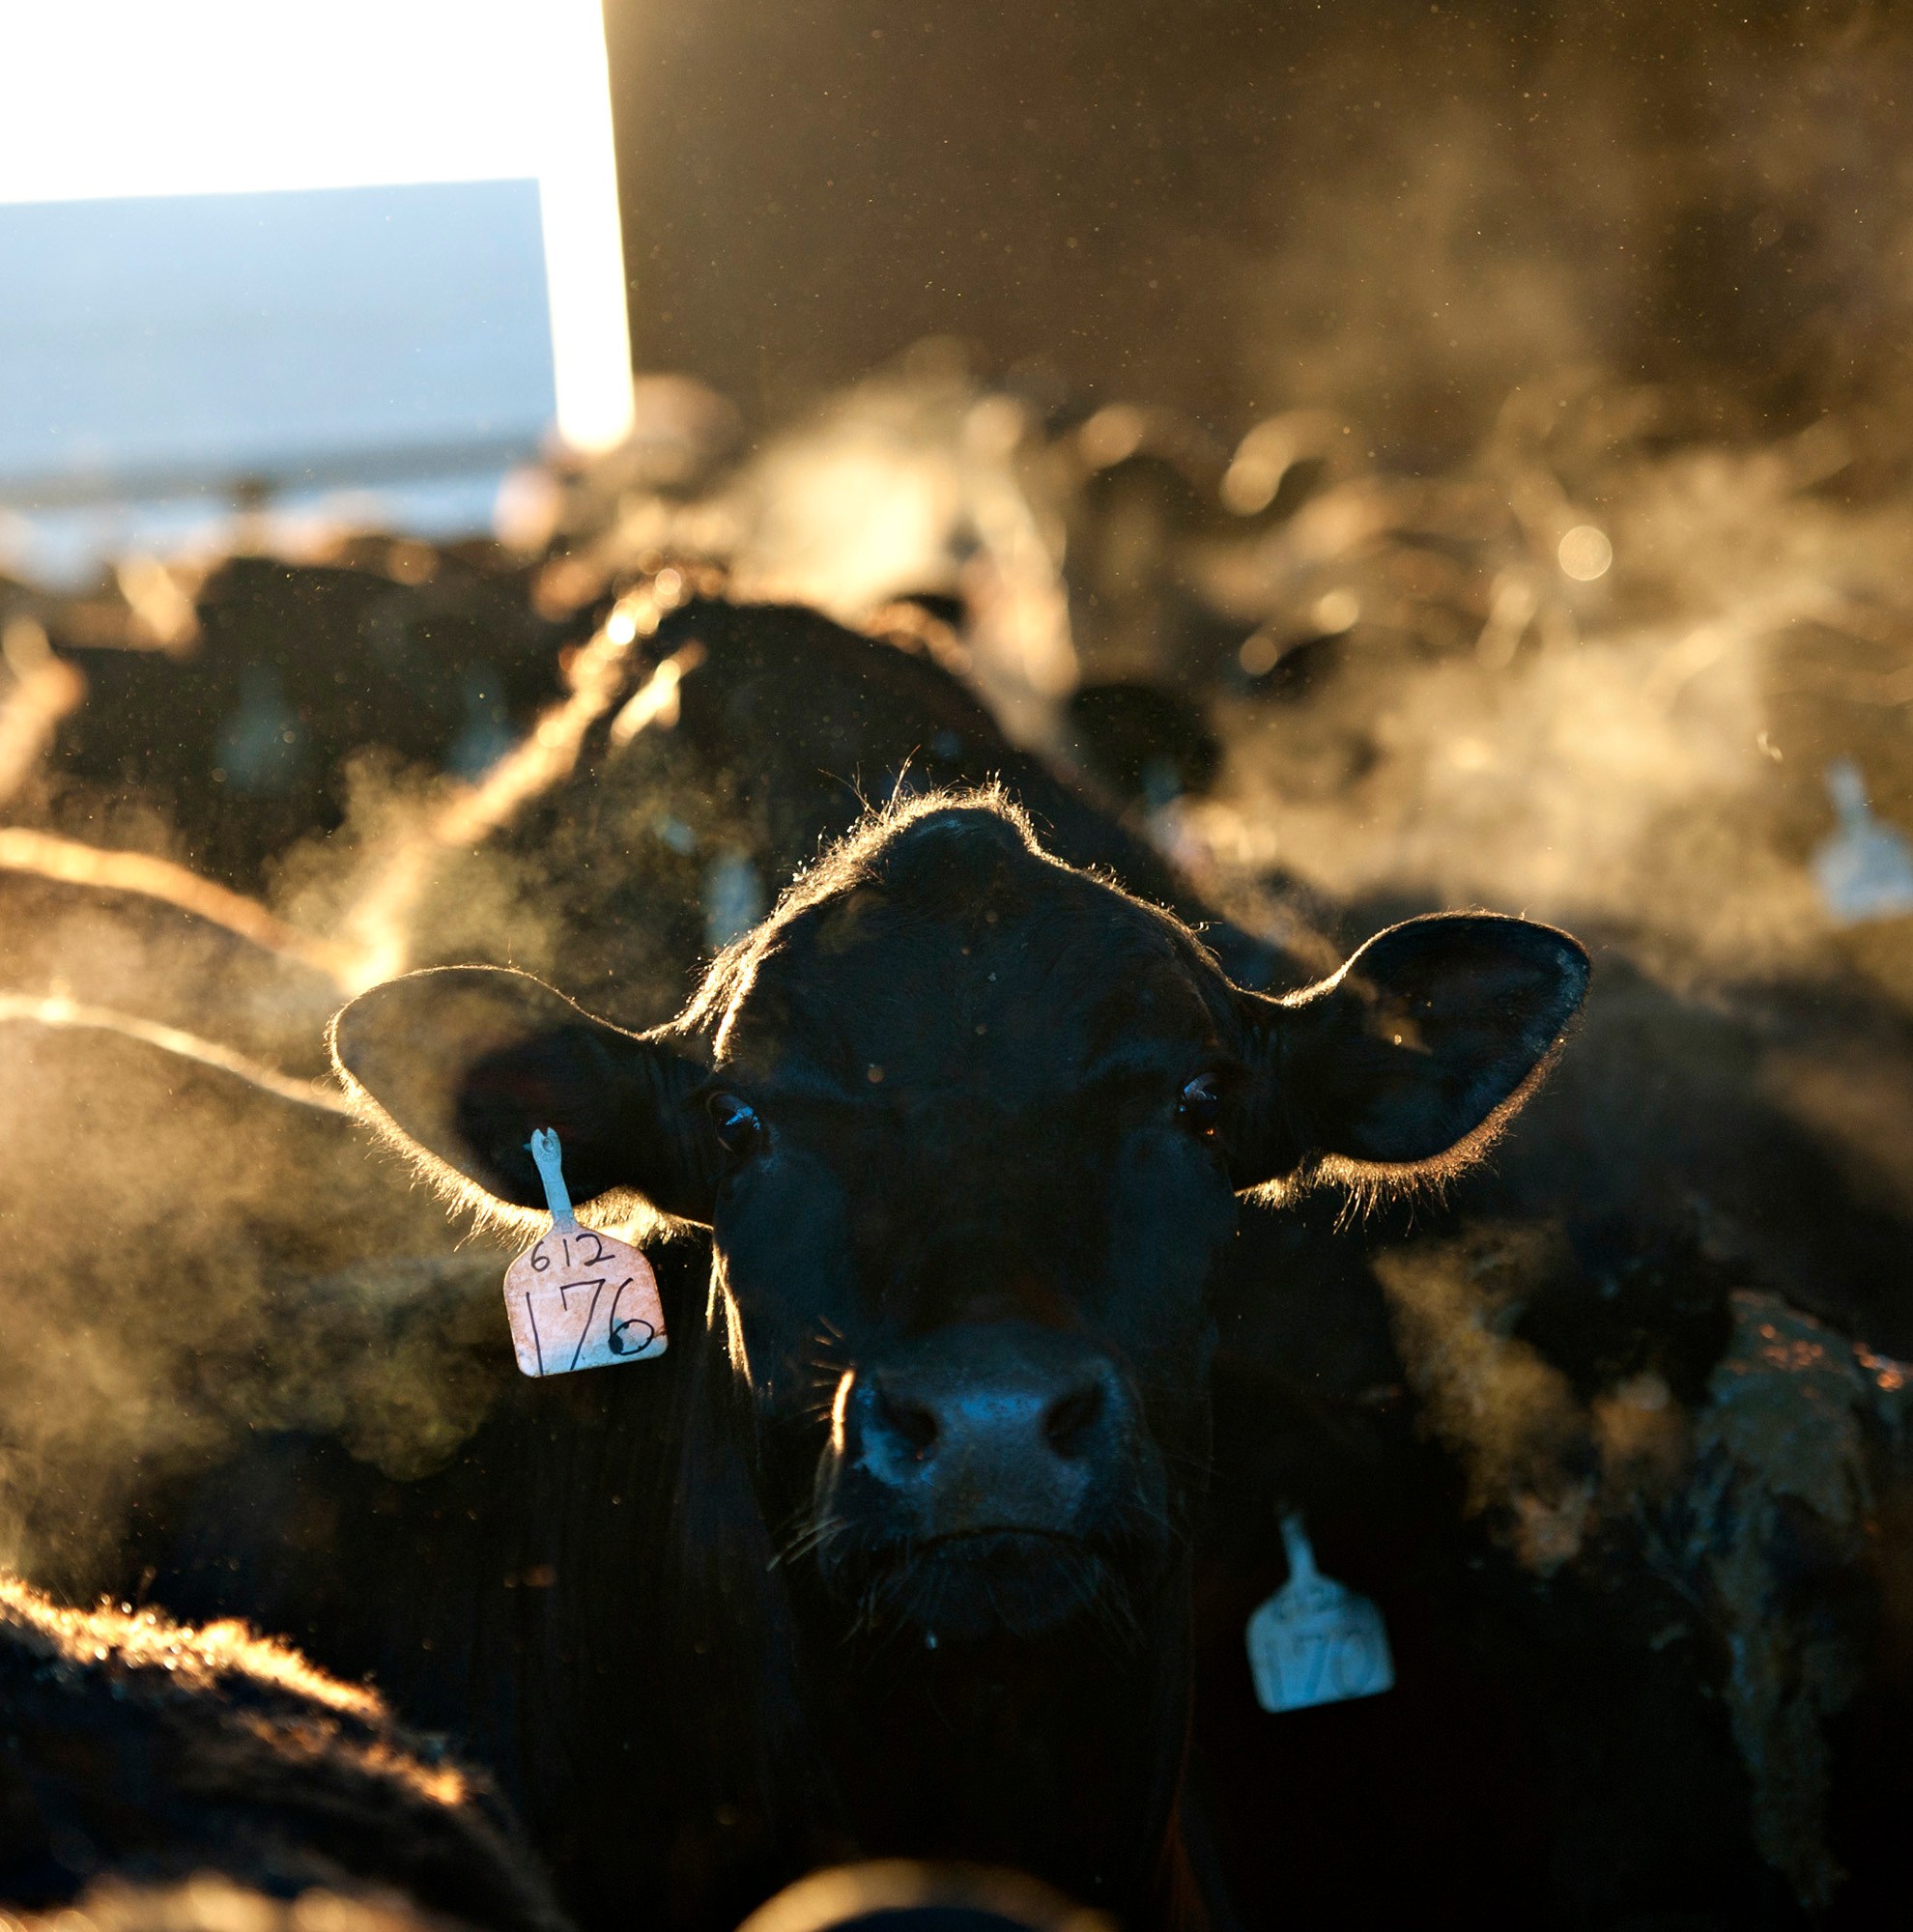 “Climate-friendly” beef could land in a meat aisle near you. Don’t fall for it.